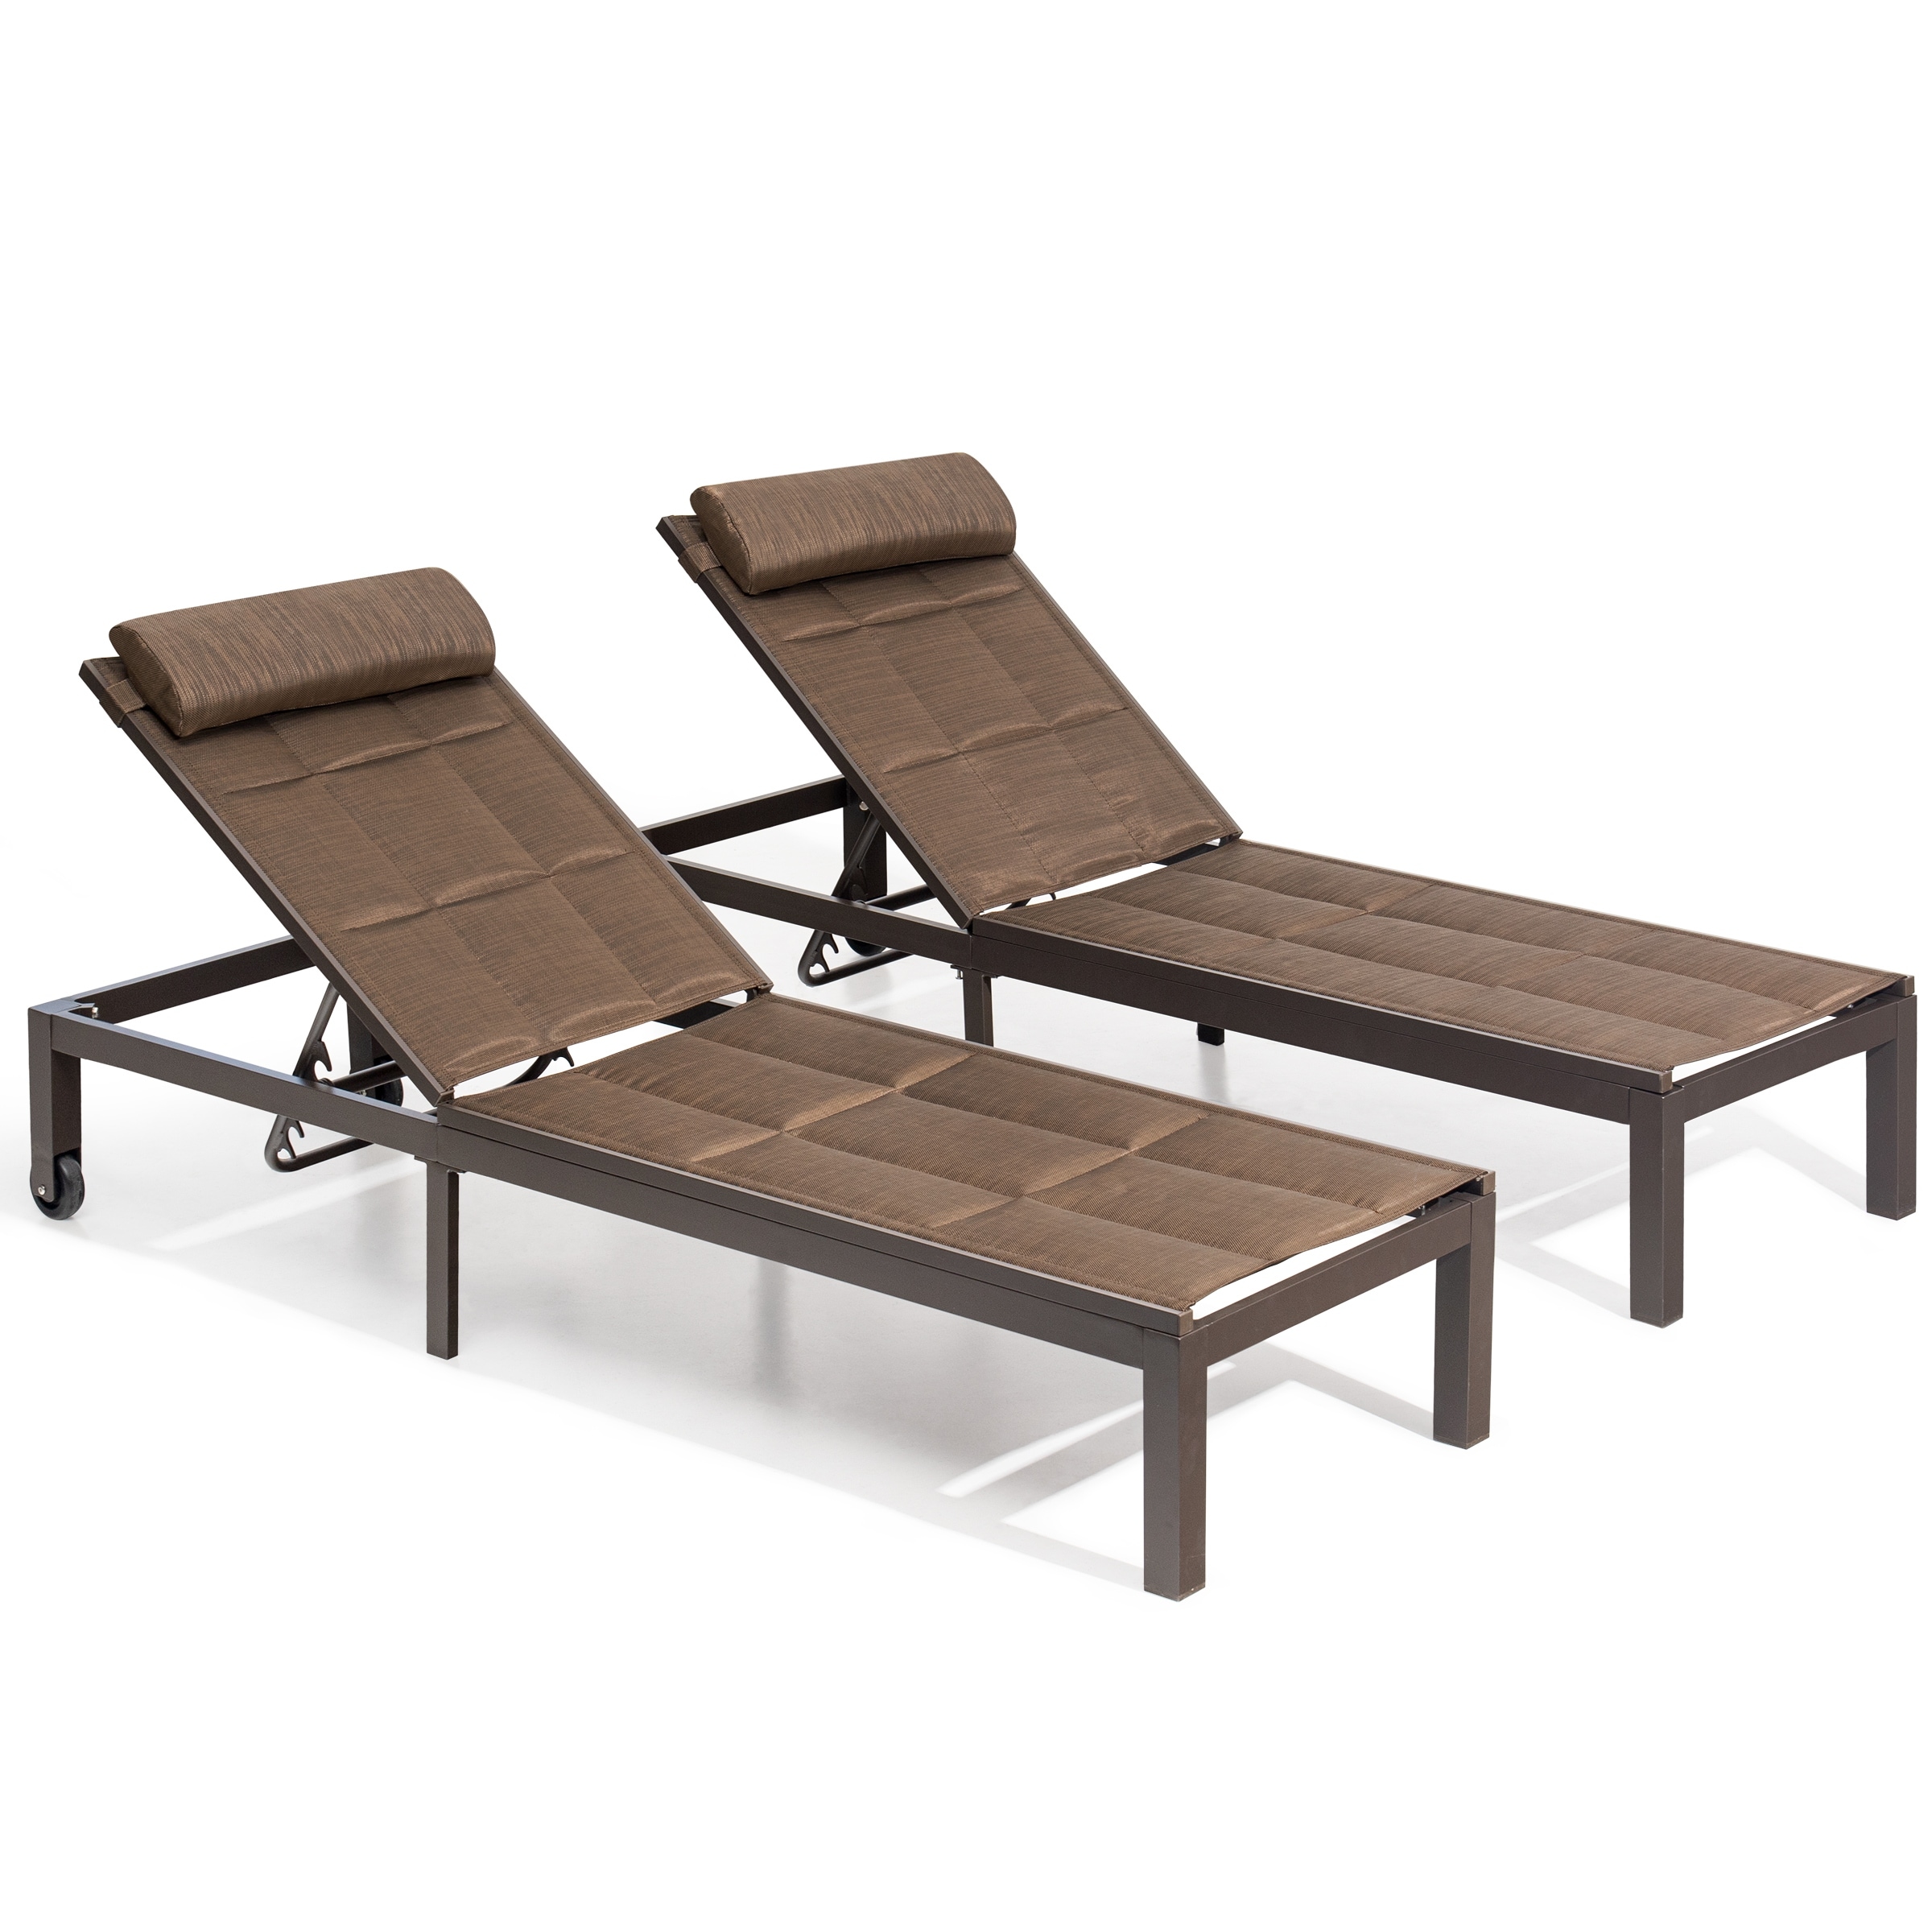 Outdoor Adjustable Quilted Chaise Lounge Chairs With Wheels (set Of 2) - 77.17 L × 23.62 W × 13.38 H